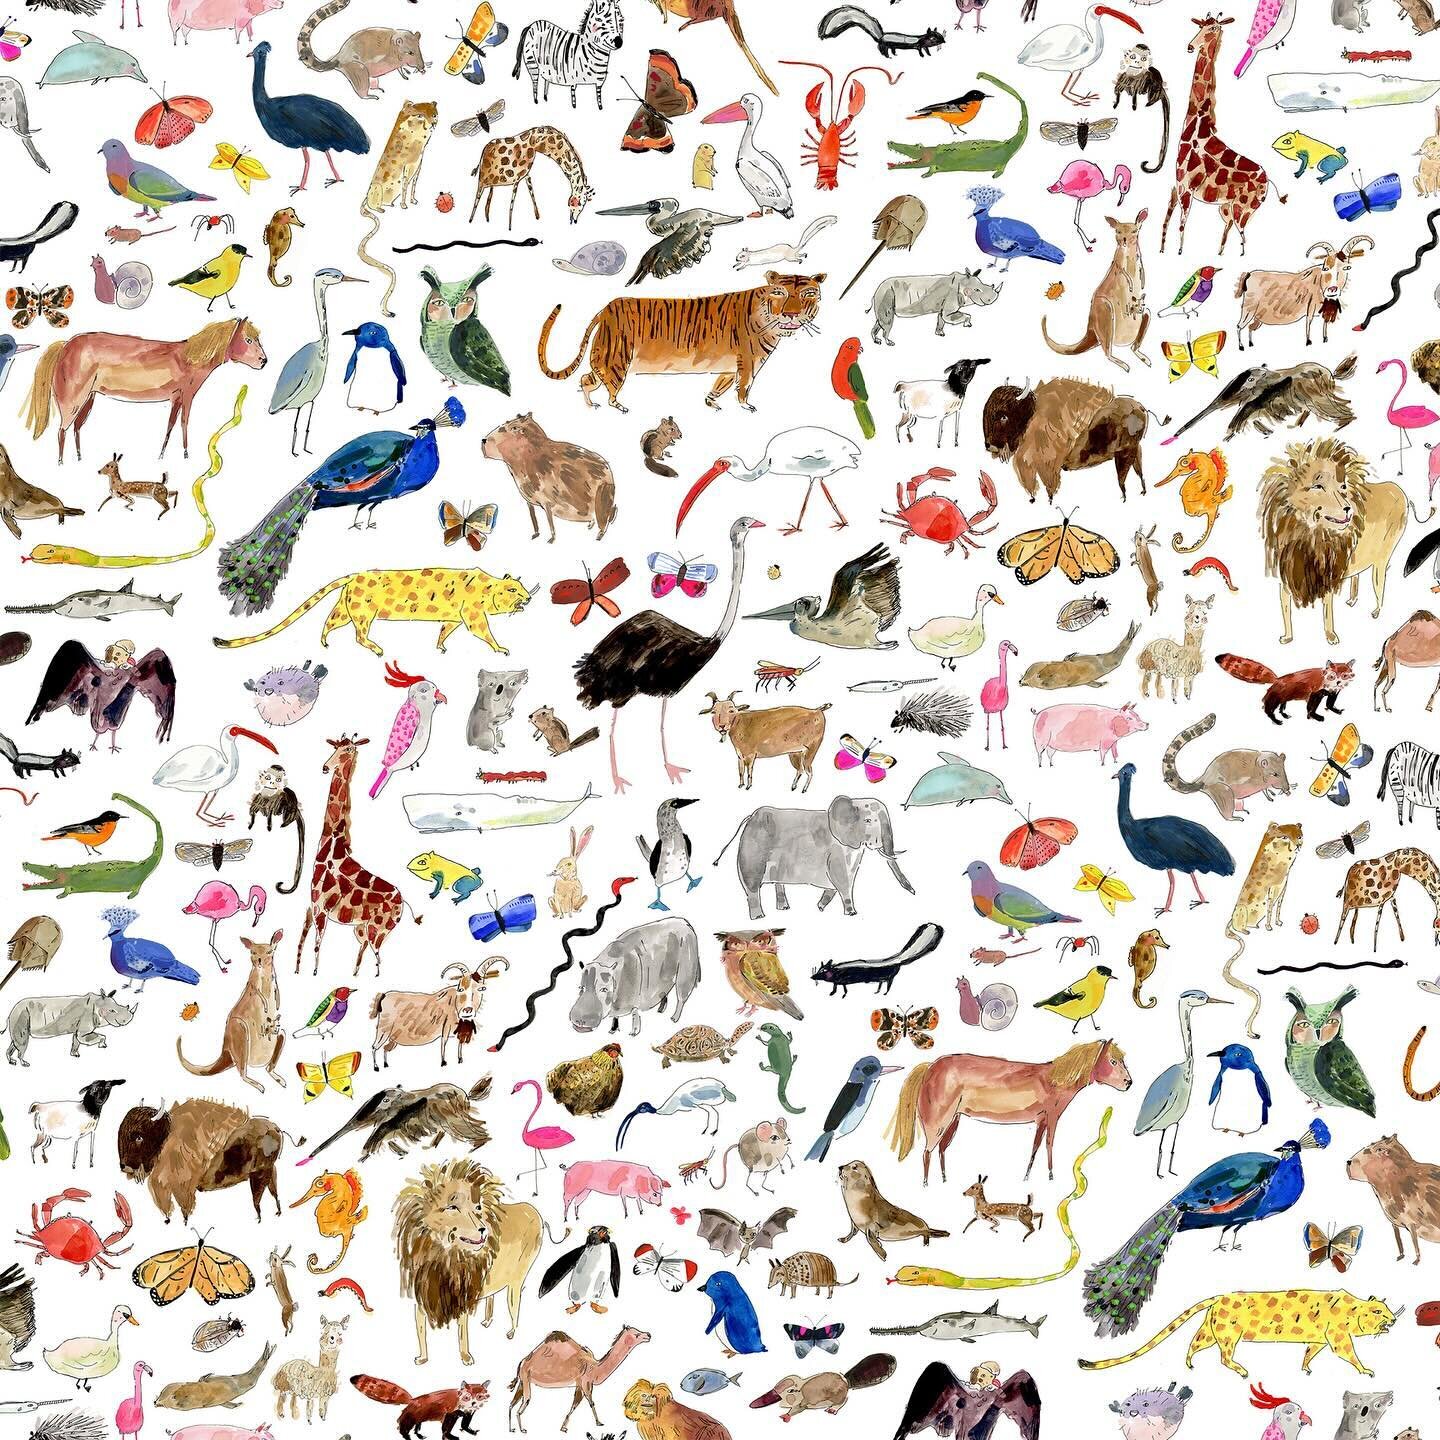 Animals pattern 🦩 🐫 🦓 🦬 🐖 🐇 🐘 🐋 🐊 as wallpaper and fabric